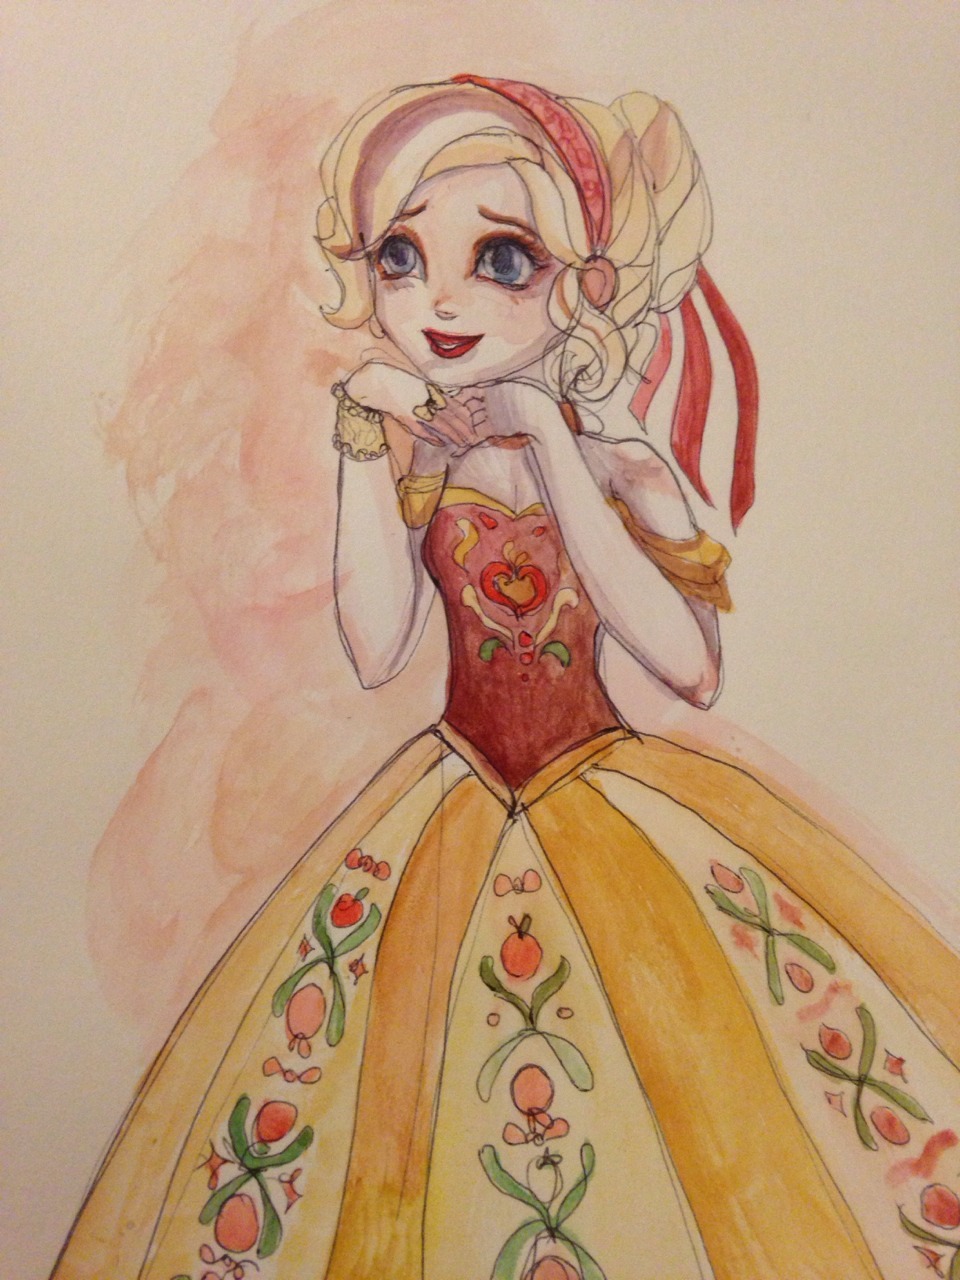 The Apple ‘anna’. Have I mentioned how much I like to draw crossovers?